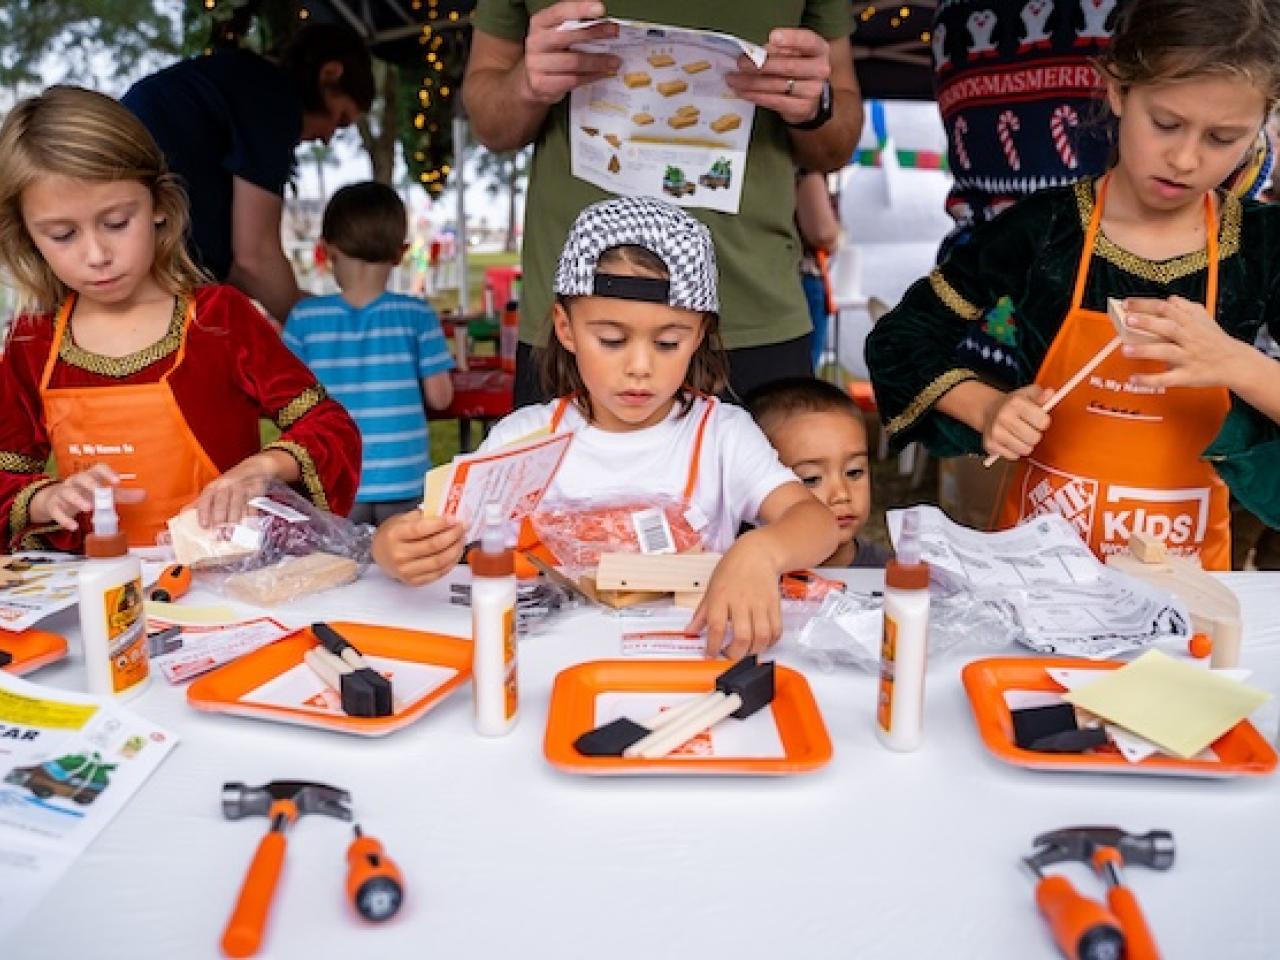 The Home Depot Kids Workshop. Kids shown at a table making crafts and gifts.